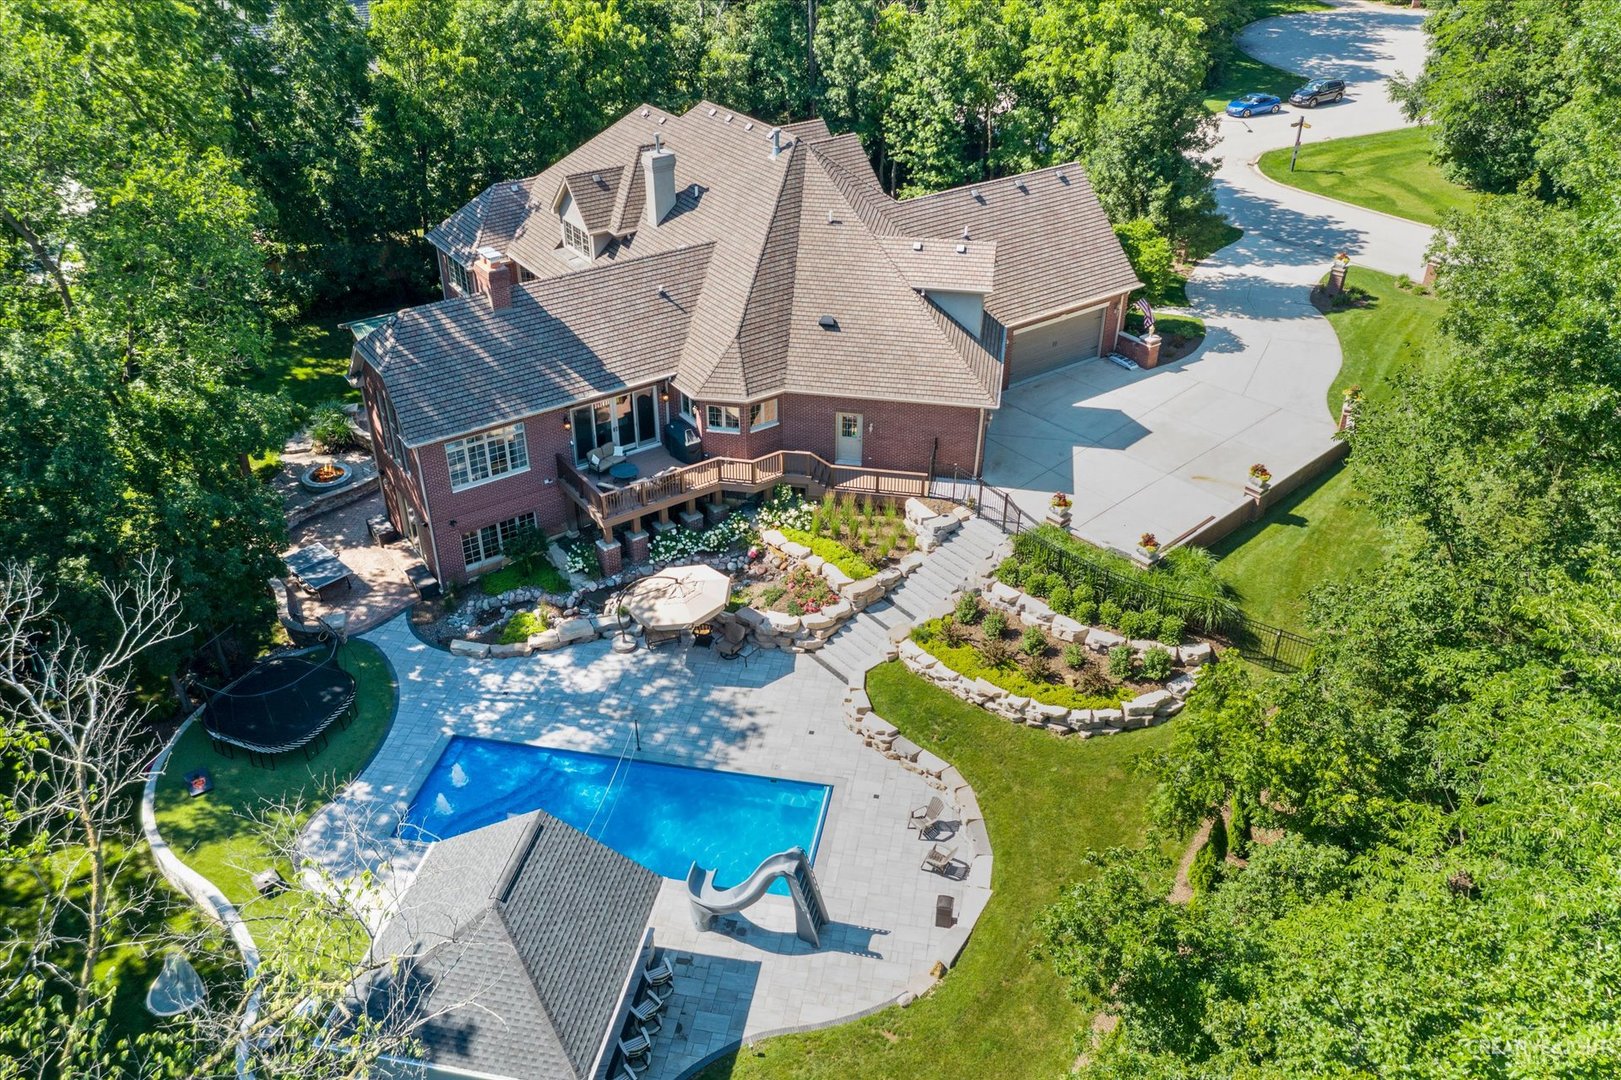 an aerial view of a house with a swimming pool and patio